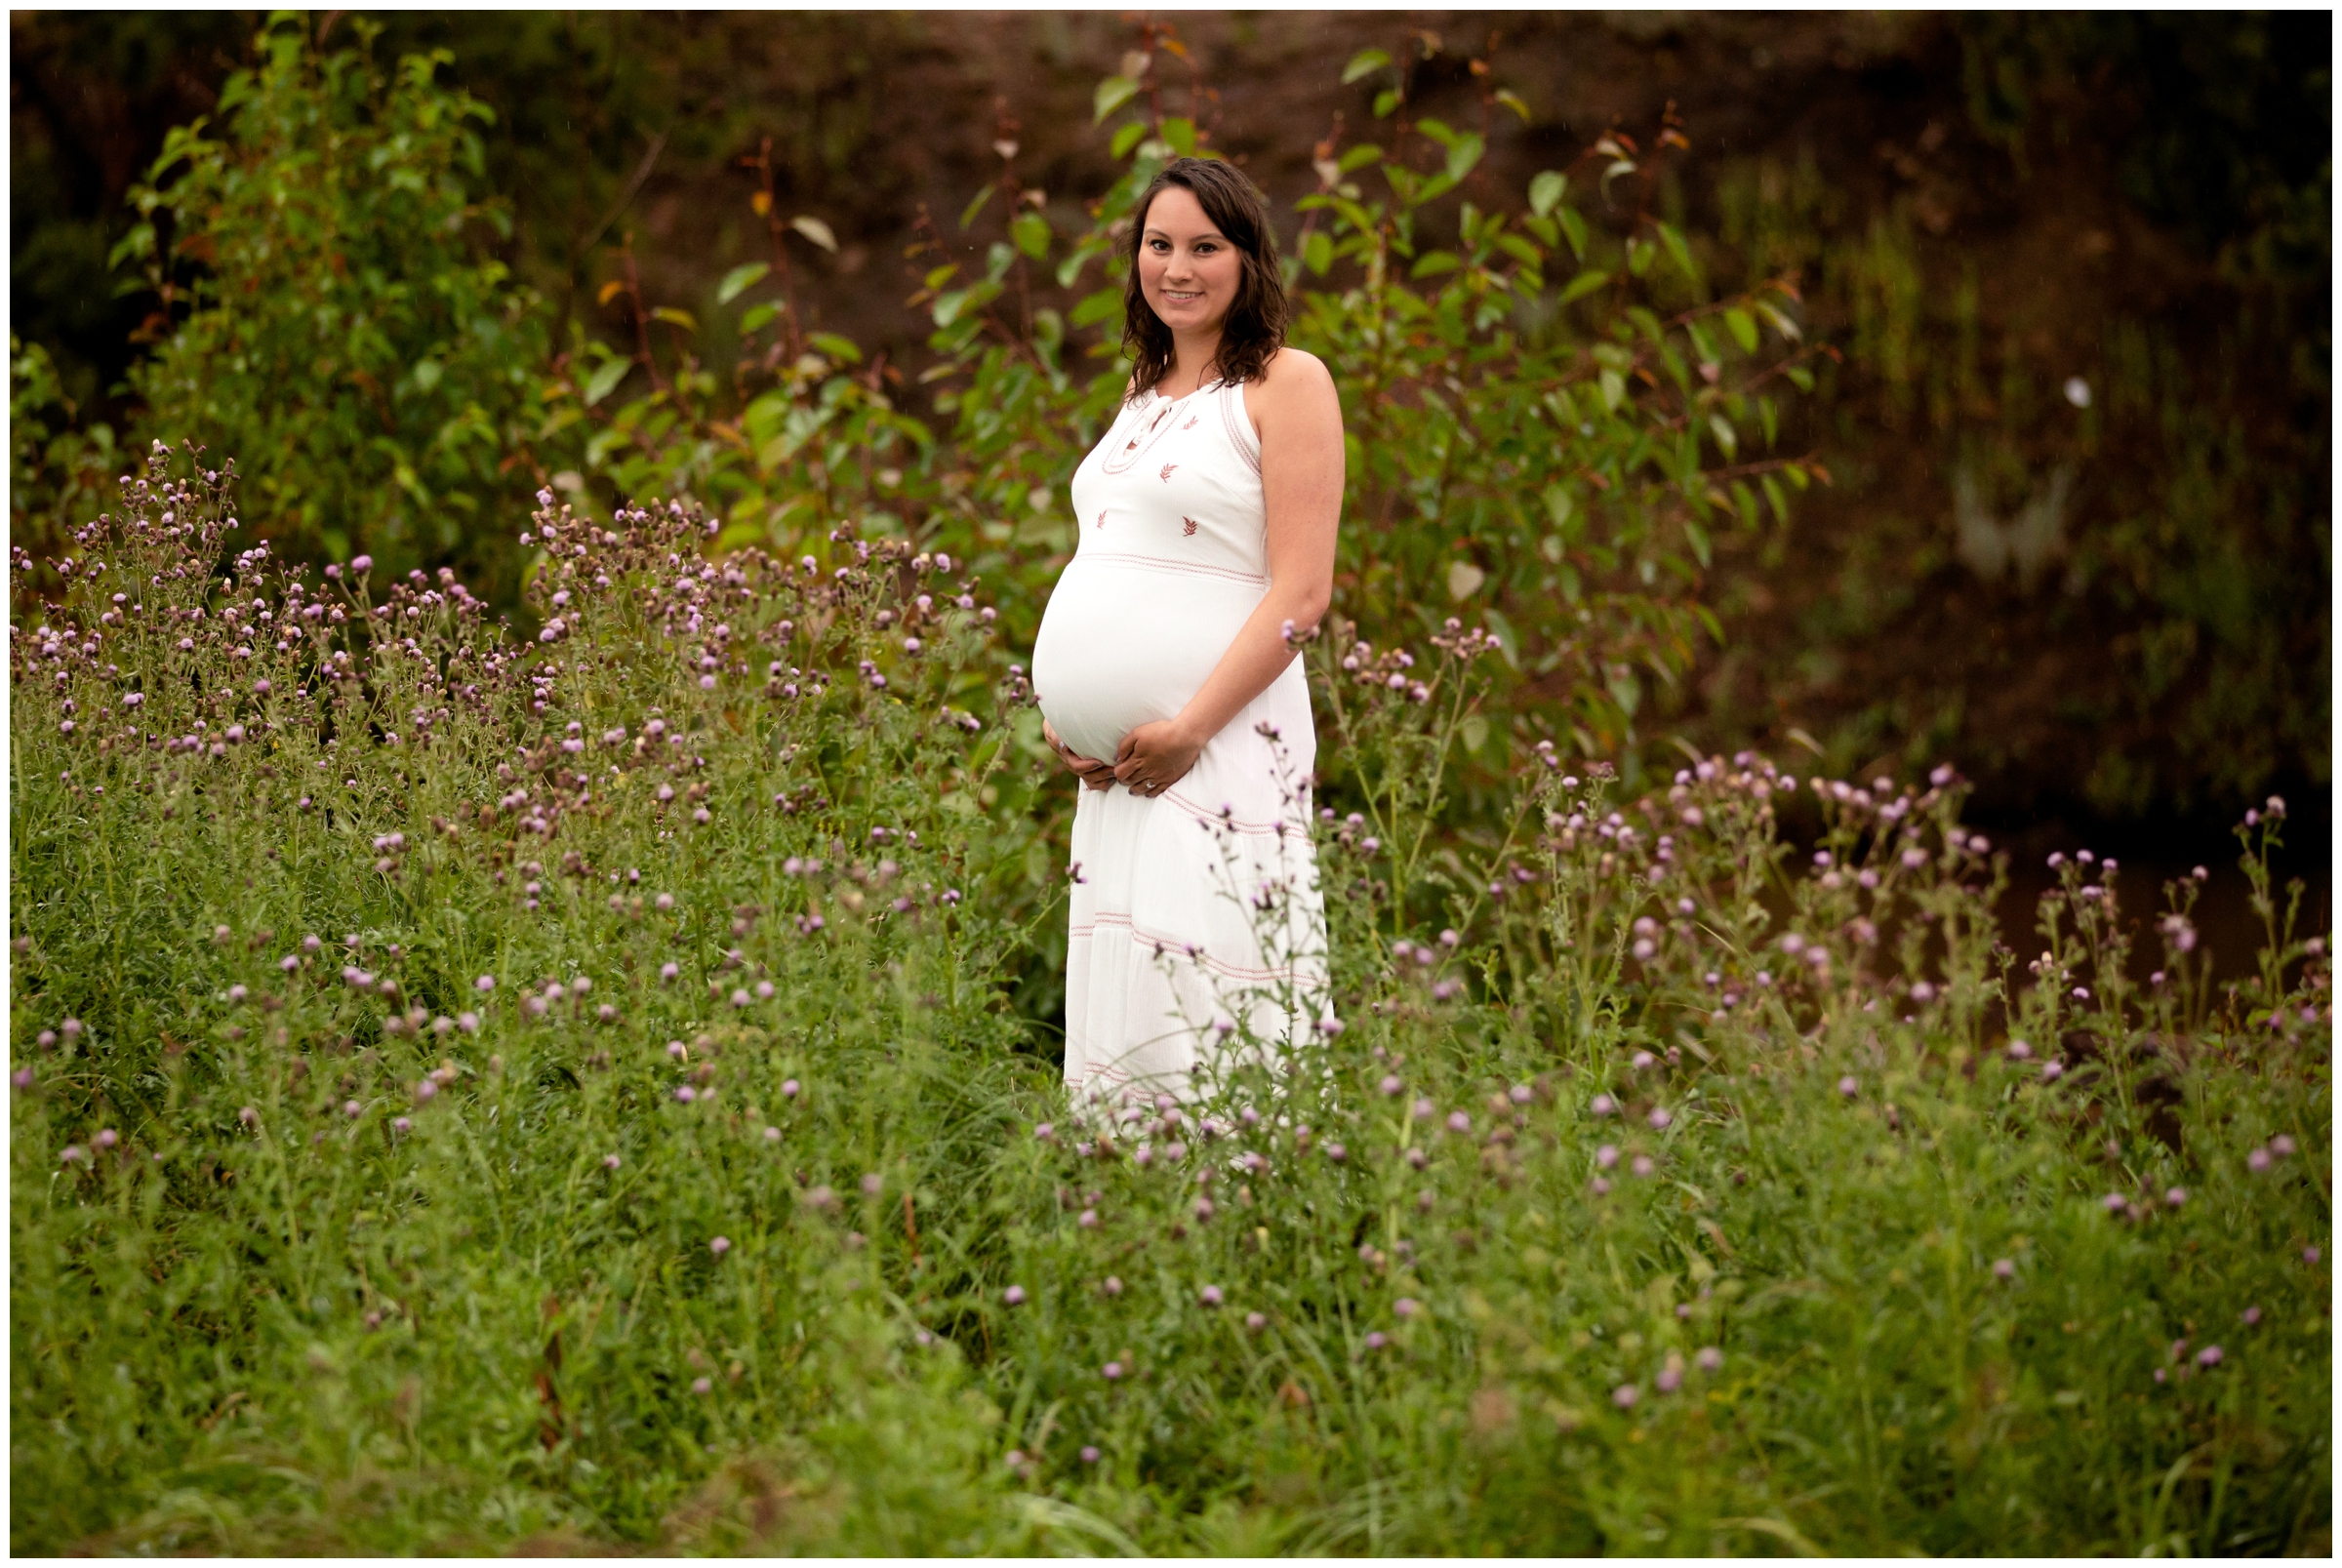 pregnant woman posing in wildflower field during Colorado maternity photography session 